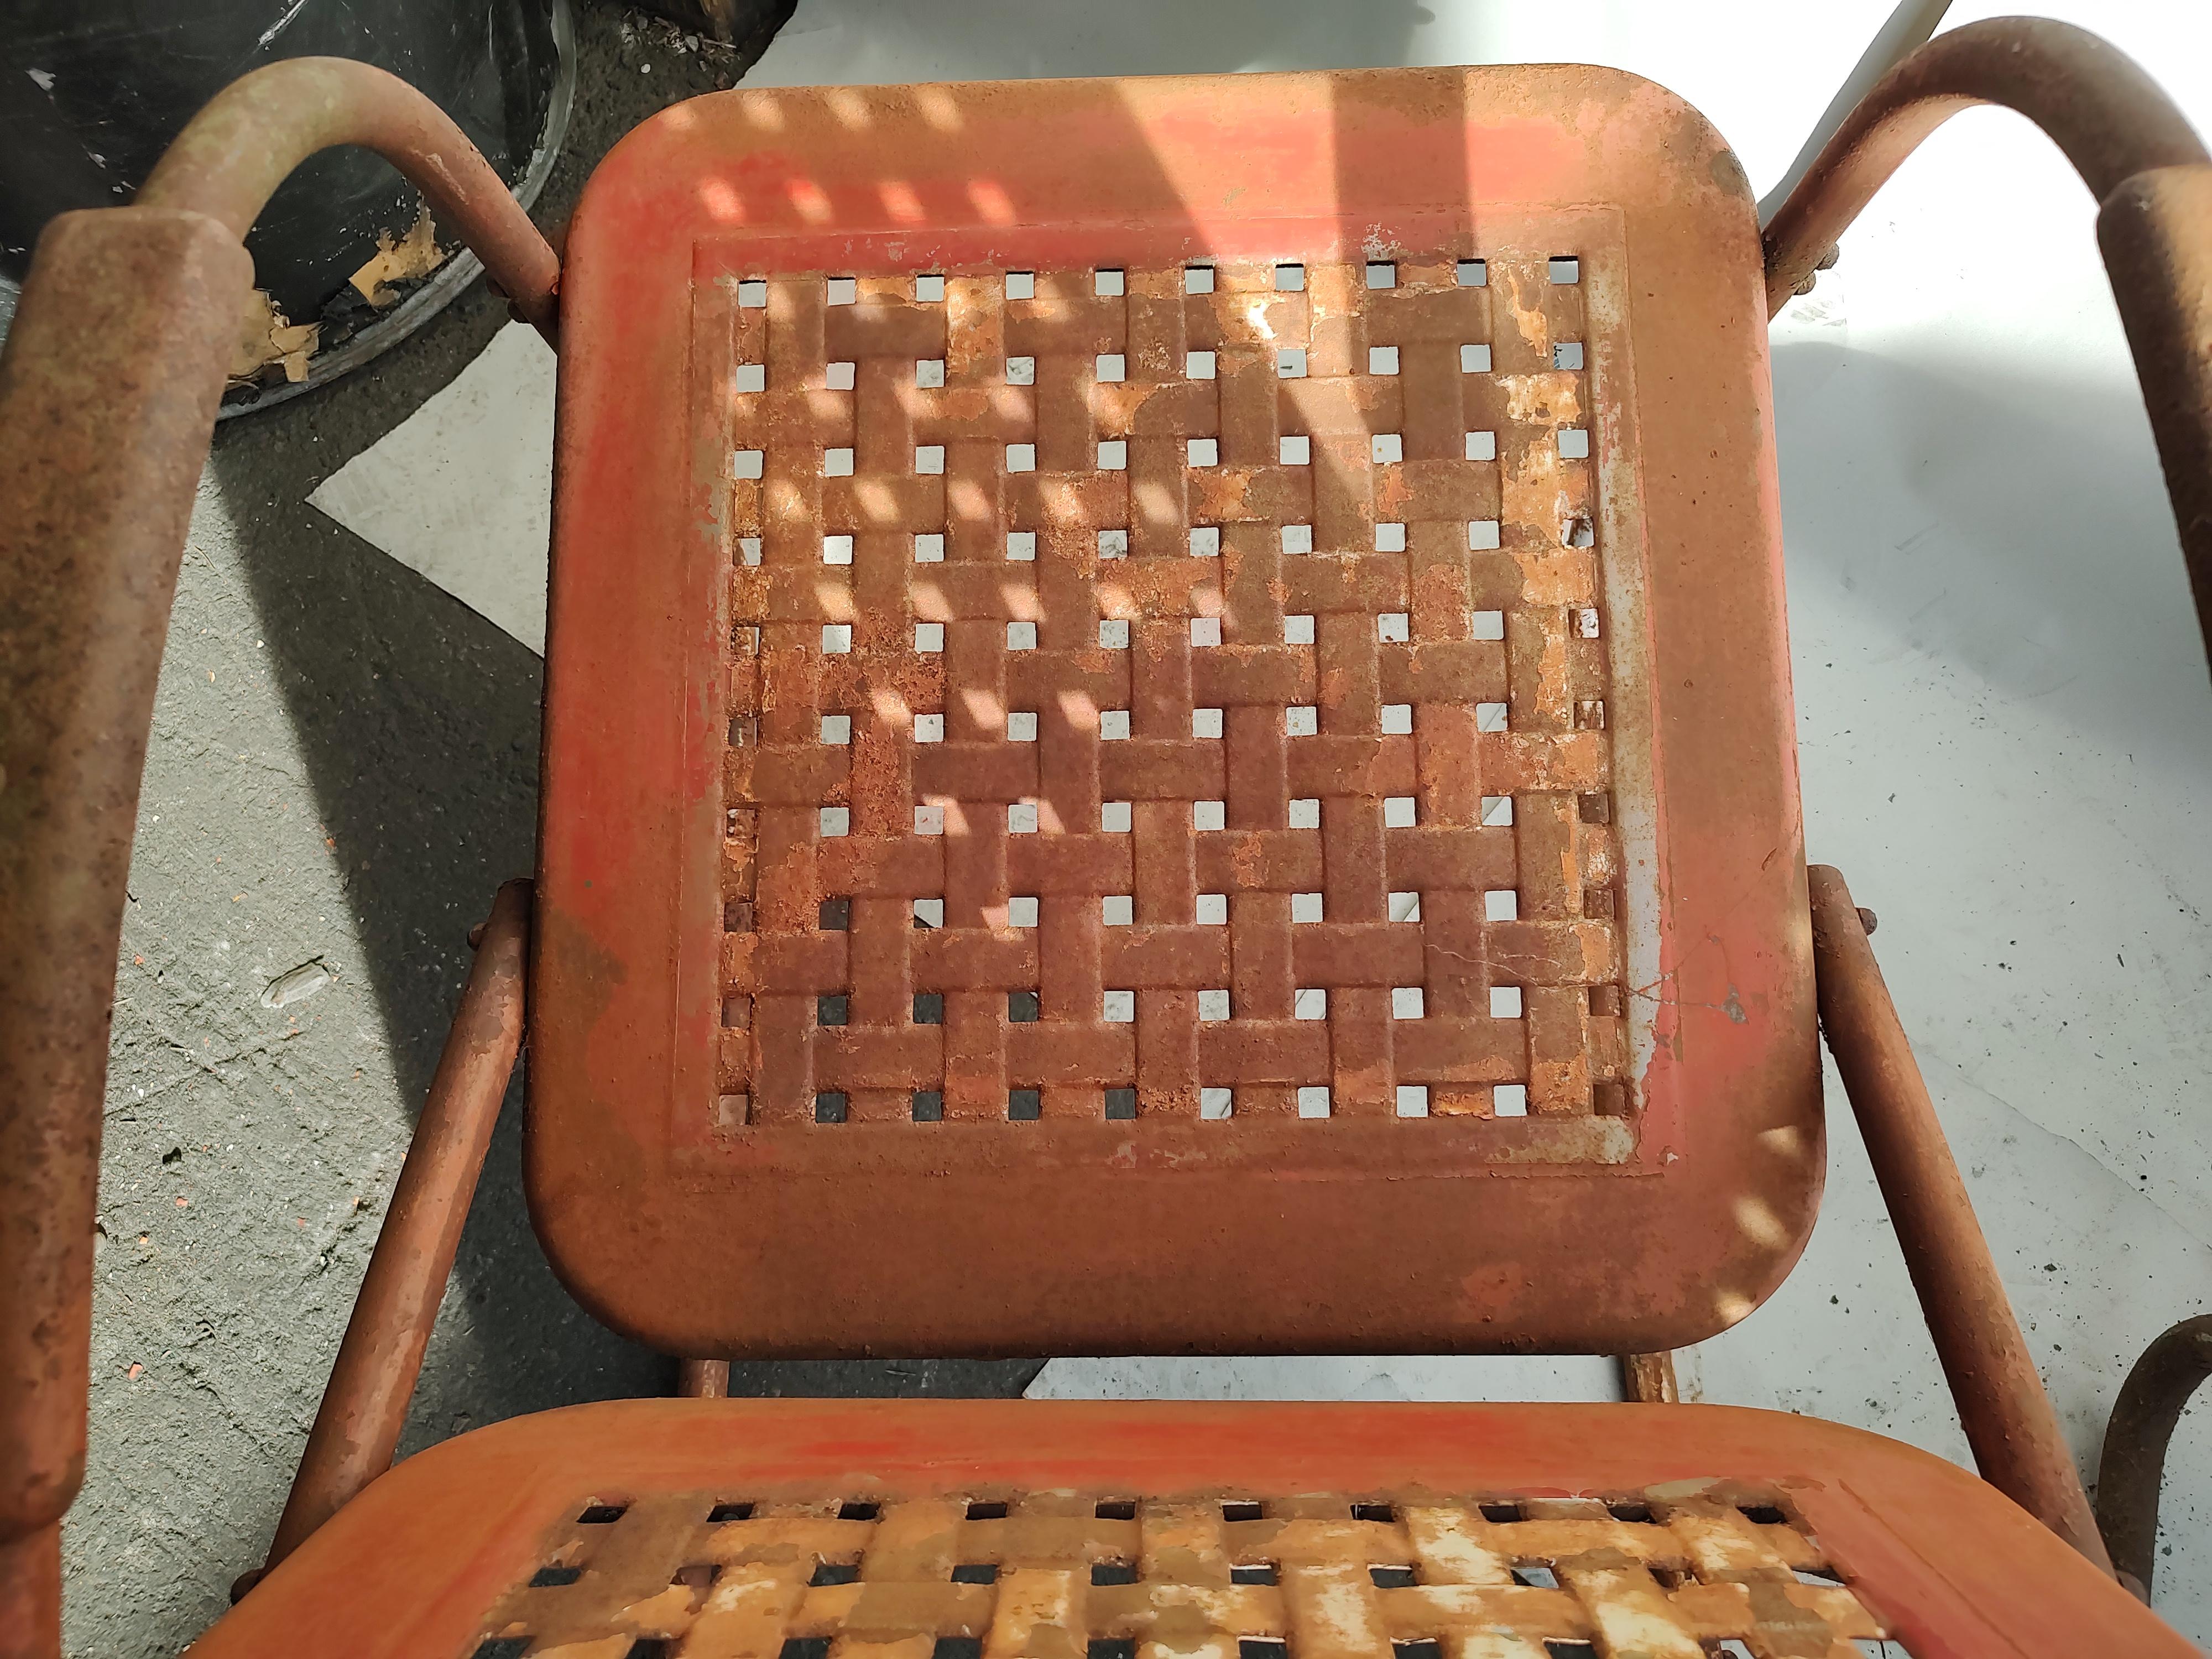 Pair of C1940 basket weave steel pierced porch chairs. Lots of patina, surface rust and original colors. One chair, blue has a dent in the seat corner. Otherwise all good structurally, ready to rock away.